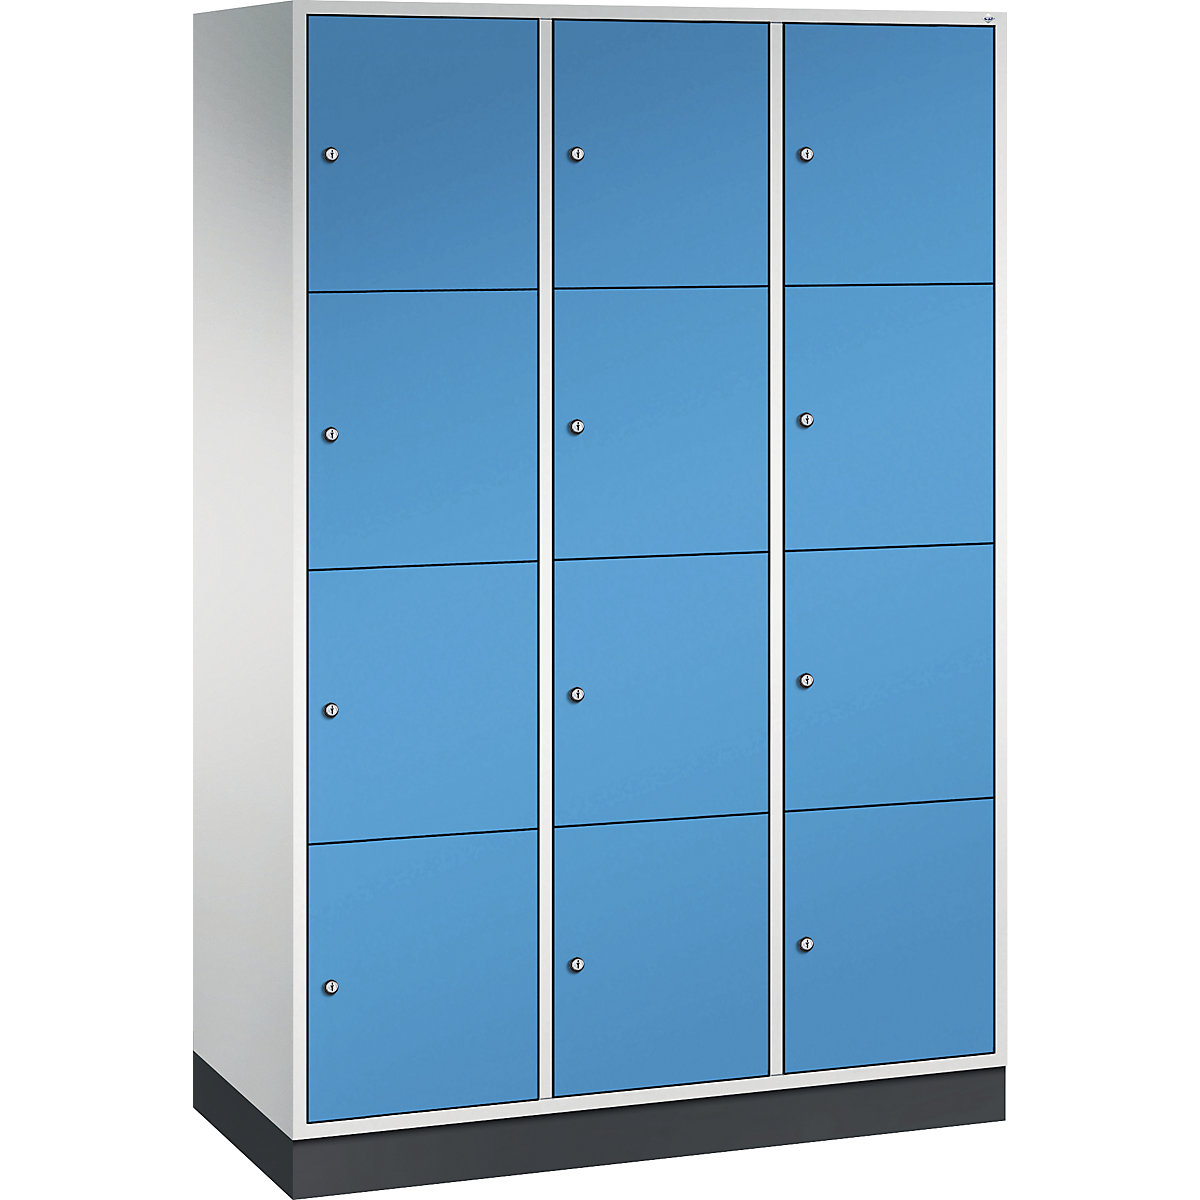 INTRO steel compartment locker, compartment height 435 mm – C+P, WxD 1220 x 500 mm, 12 compartments, light grey body, light blue doors